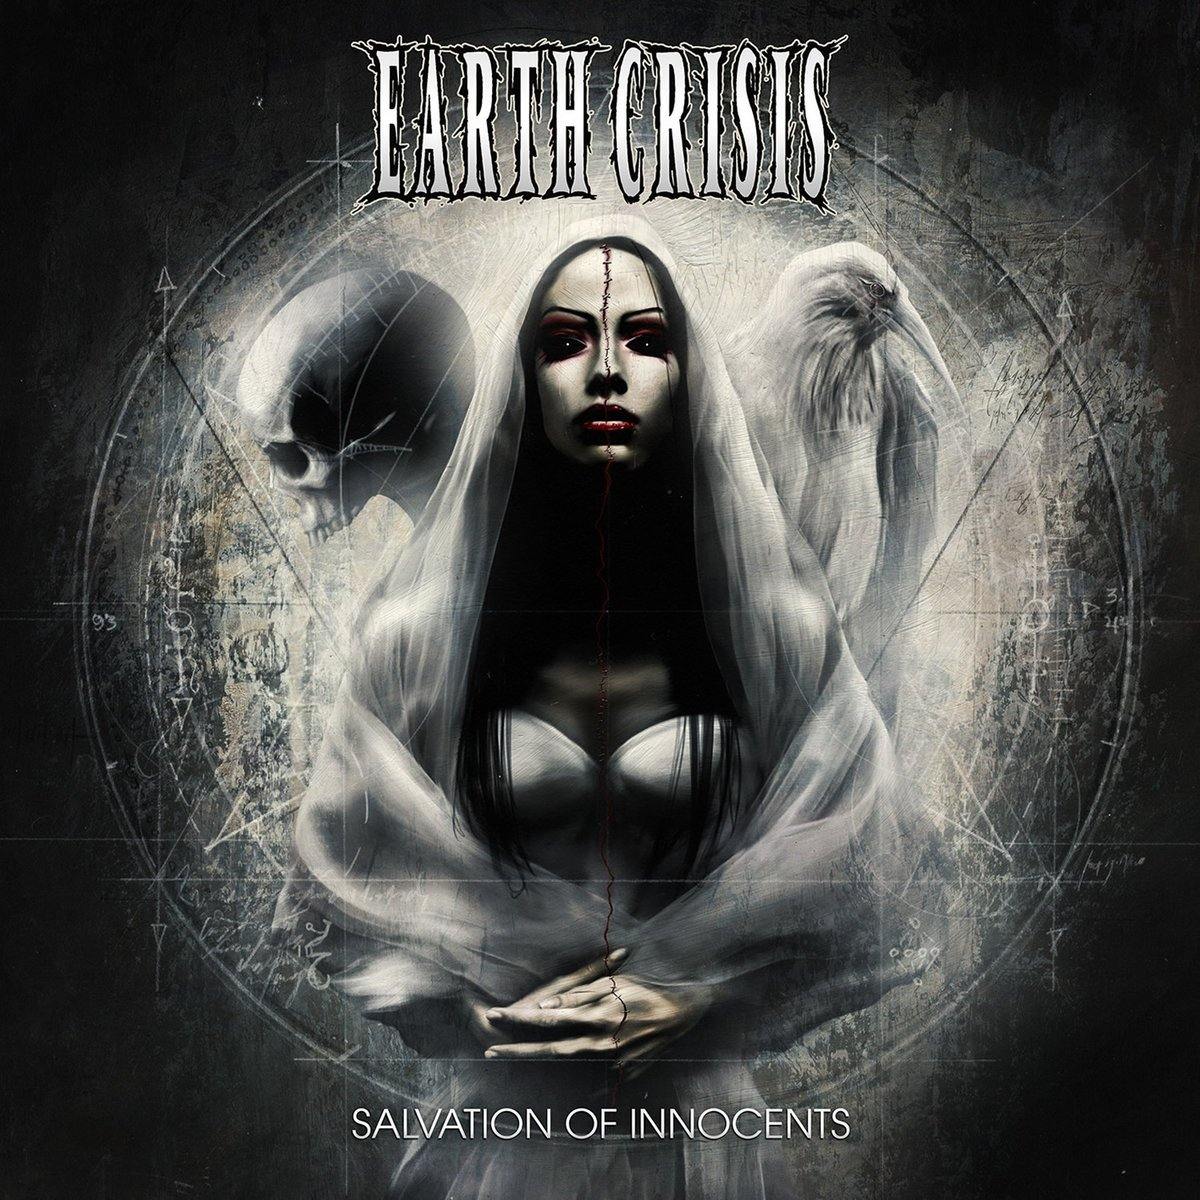 Buy – Earth Crisis "Salvation of Innocents" 12" – Band & Music Merch – Cold Cuts Merch